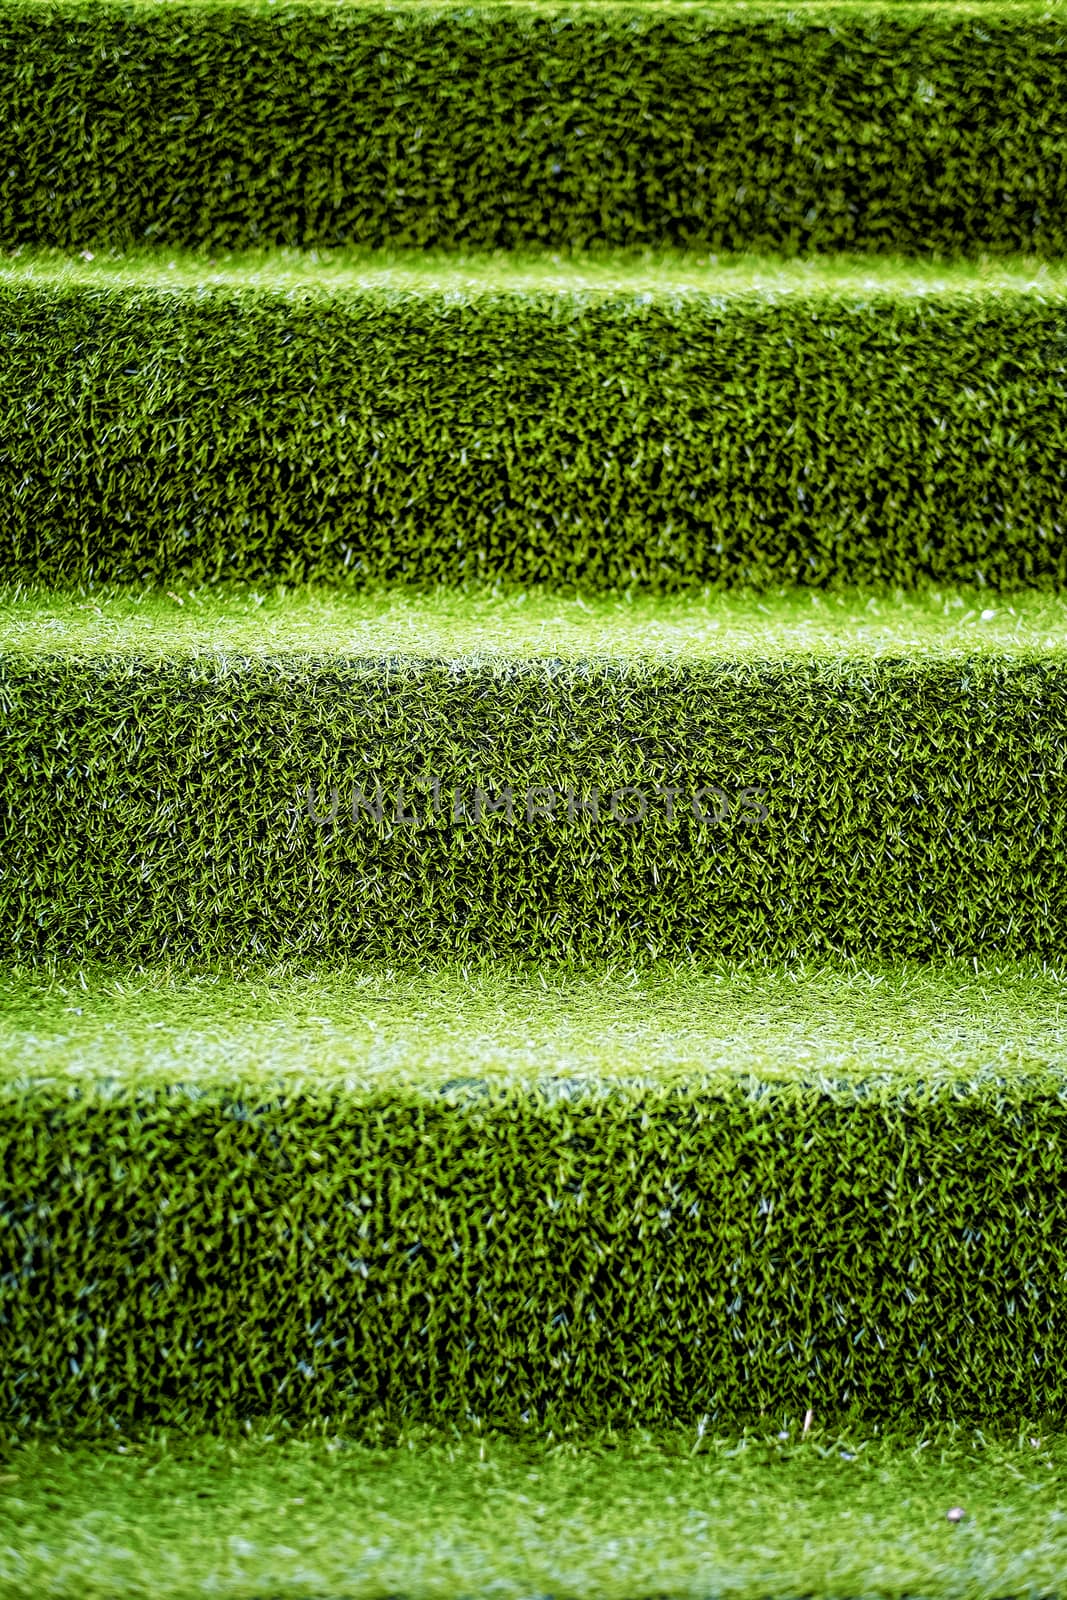 Stair covered with green grass